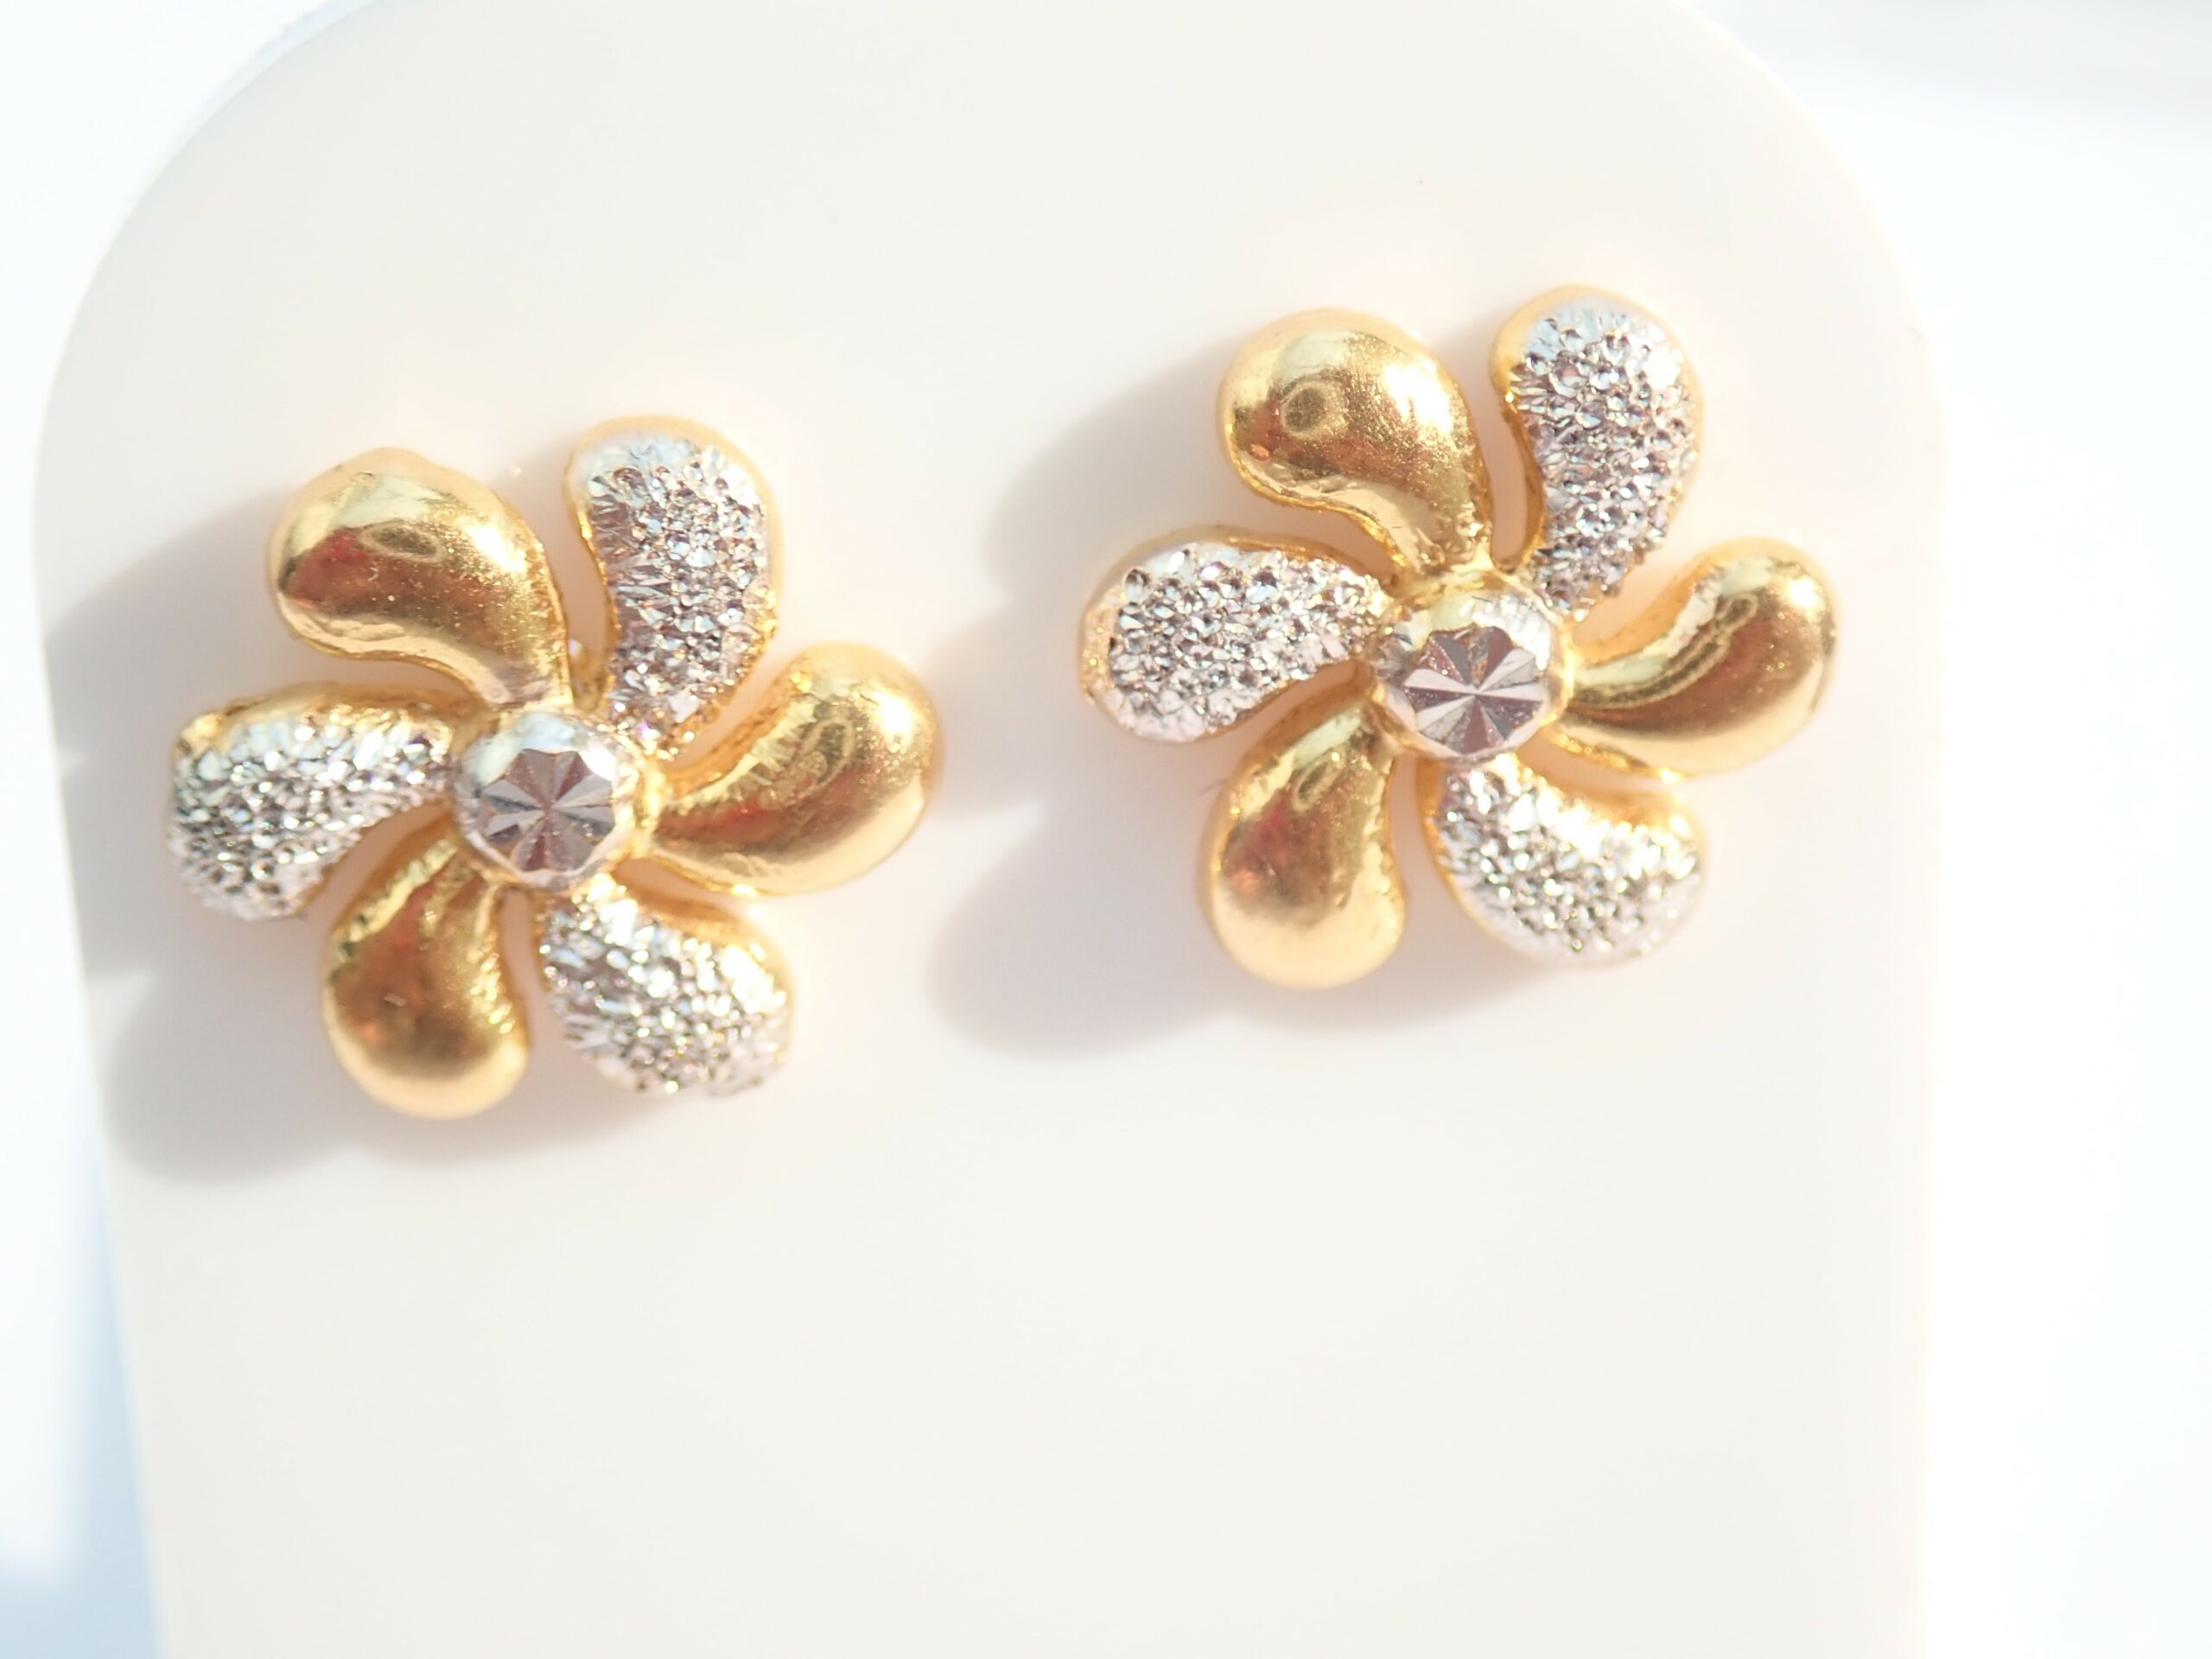 Buy quality 916 GOLD HEART SHAPE EARRING in Ahmedabad